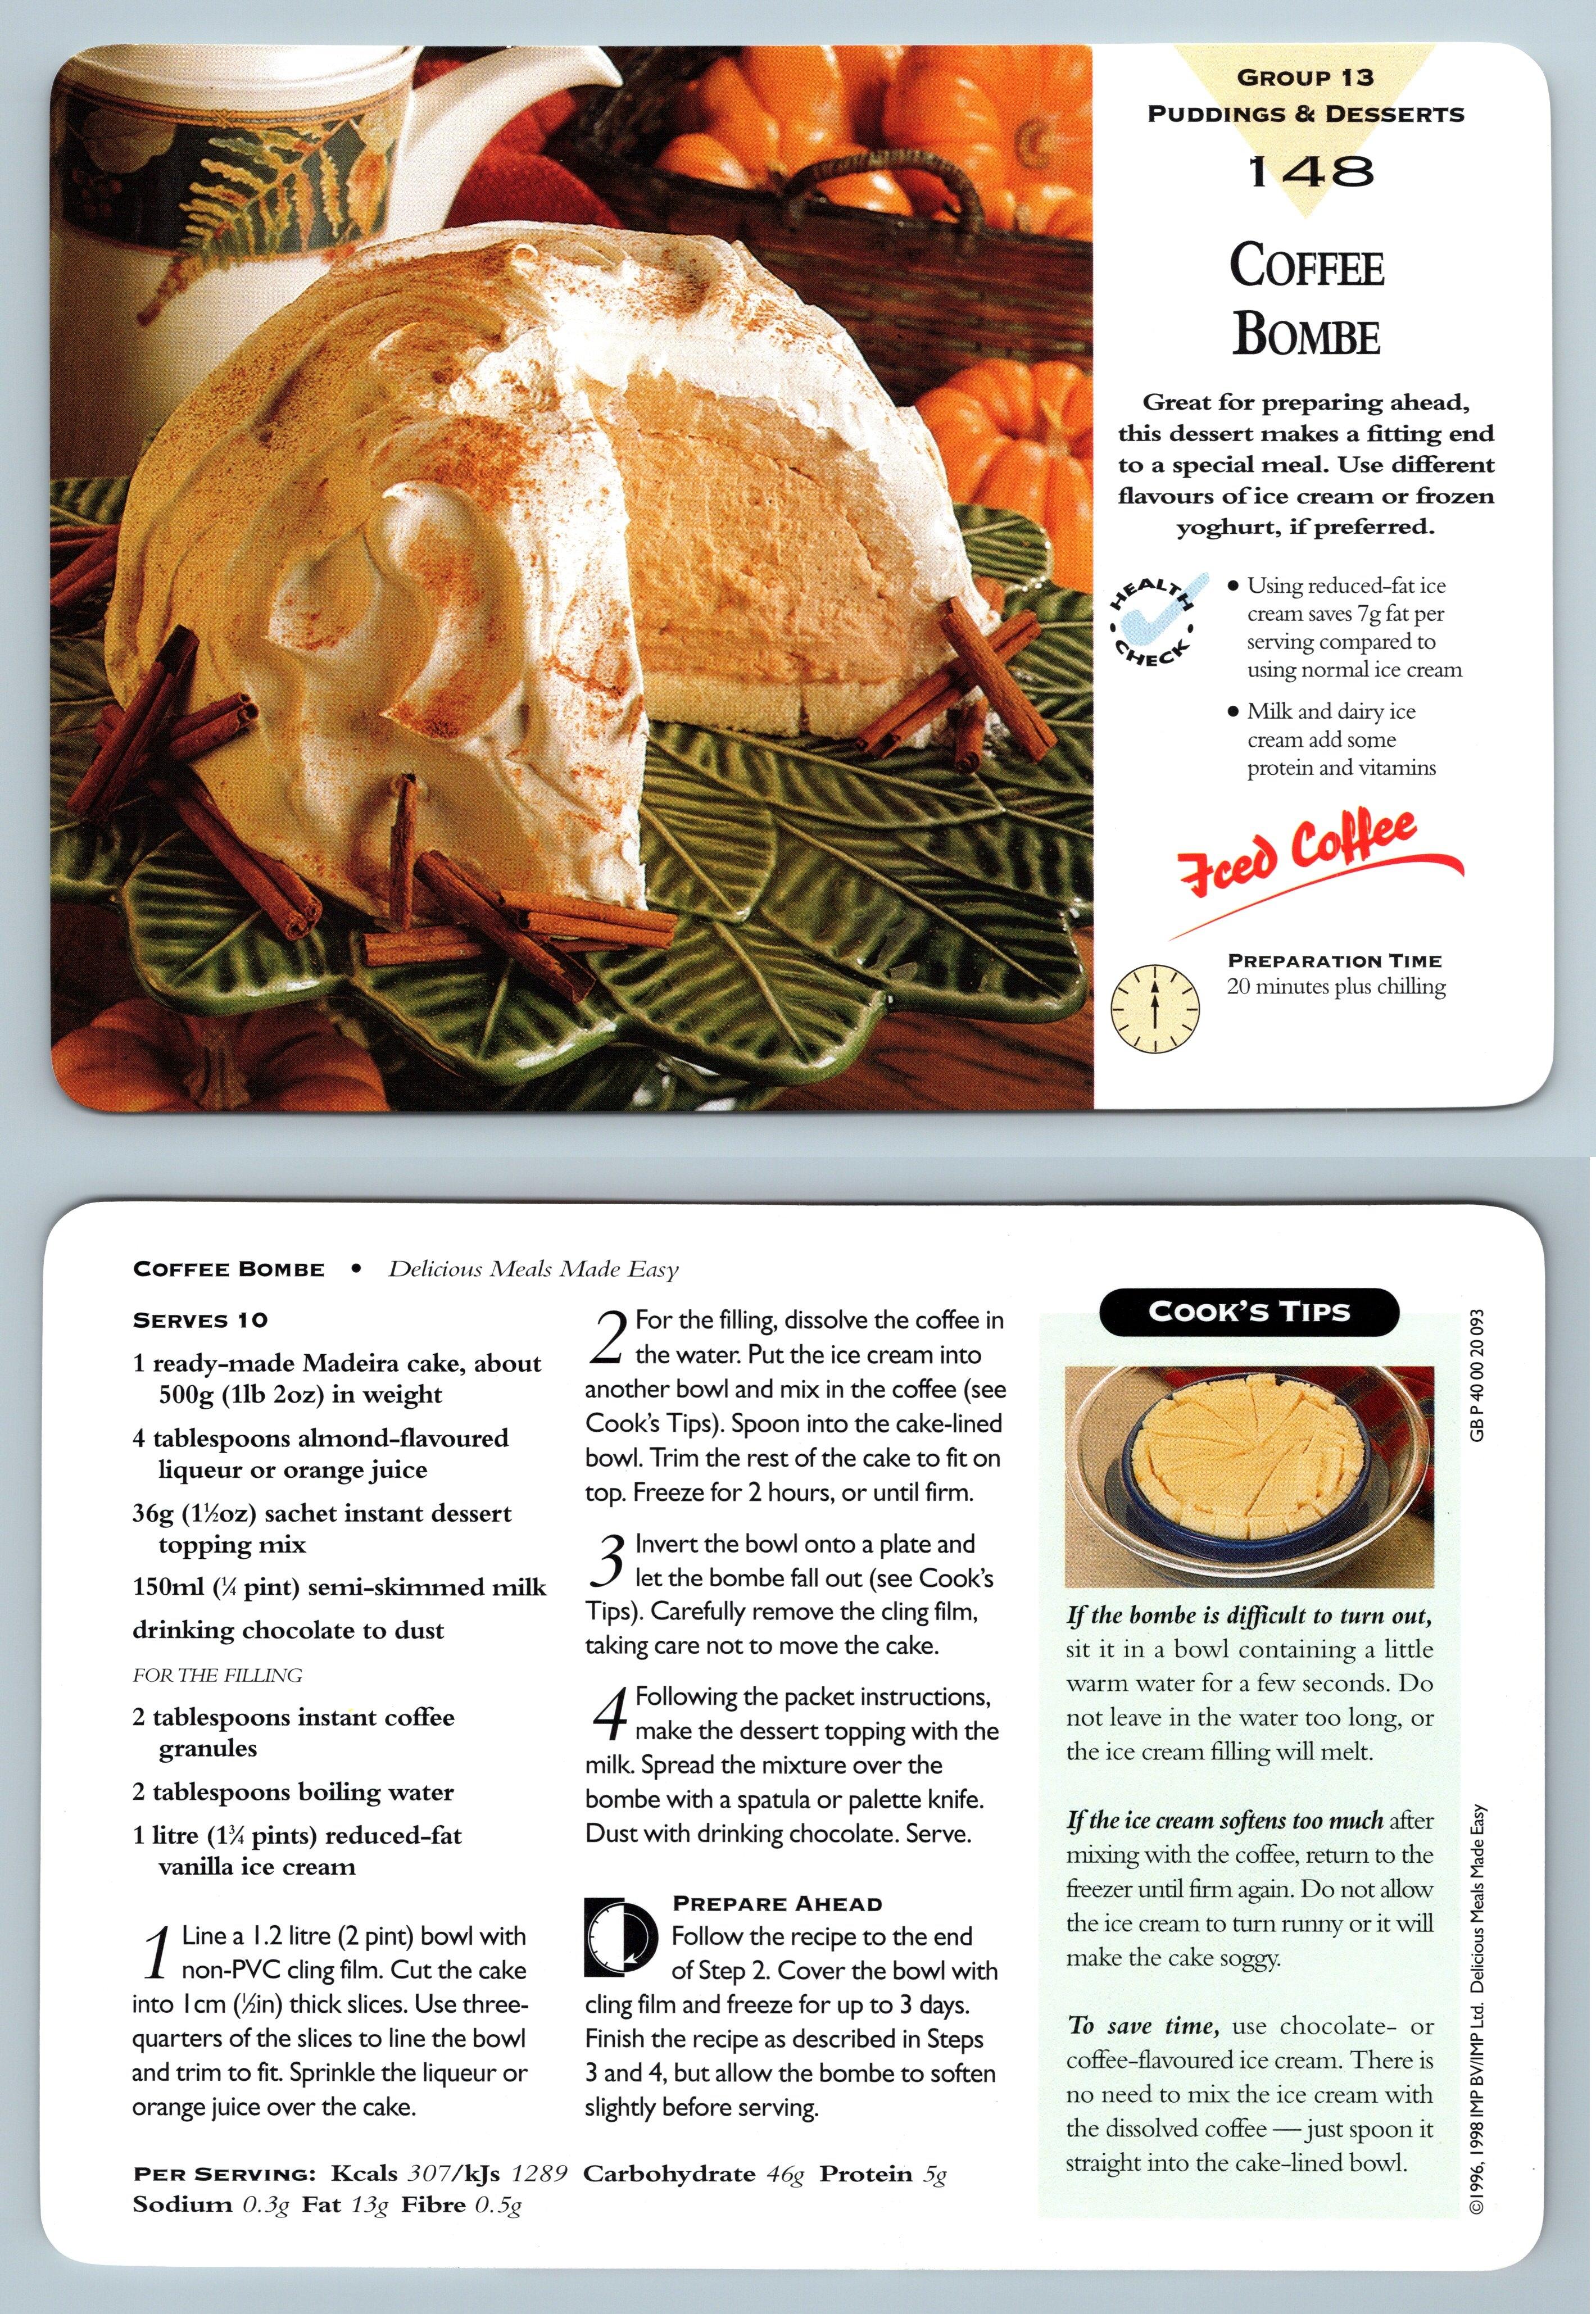 Coffee Bombe #148 Puddings Delicious Meals Made Easy 1996-7 Recipe Card